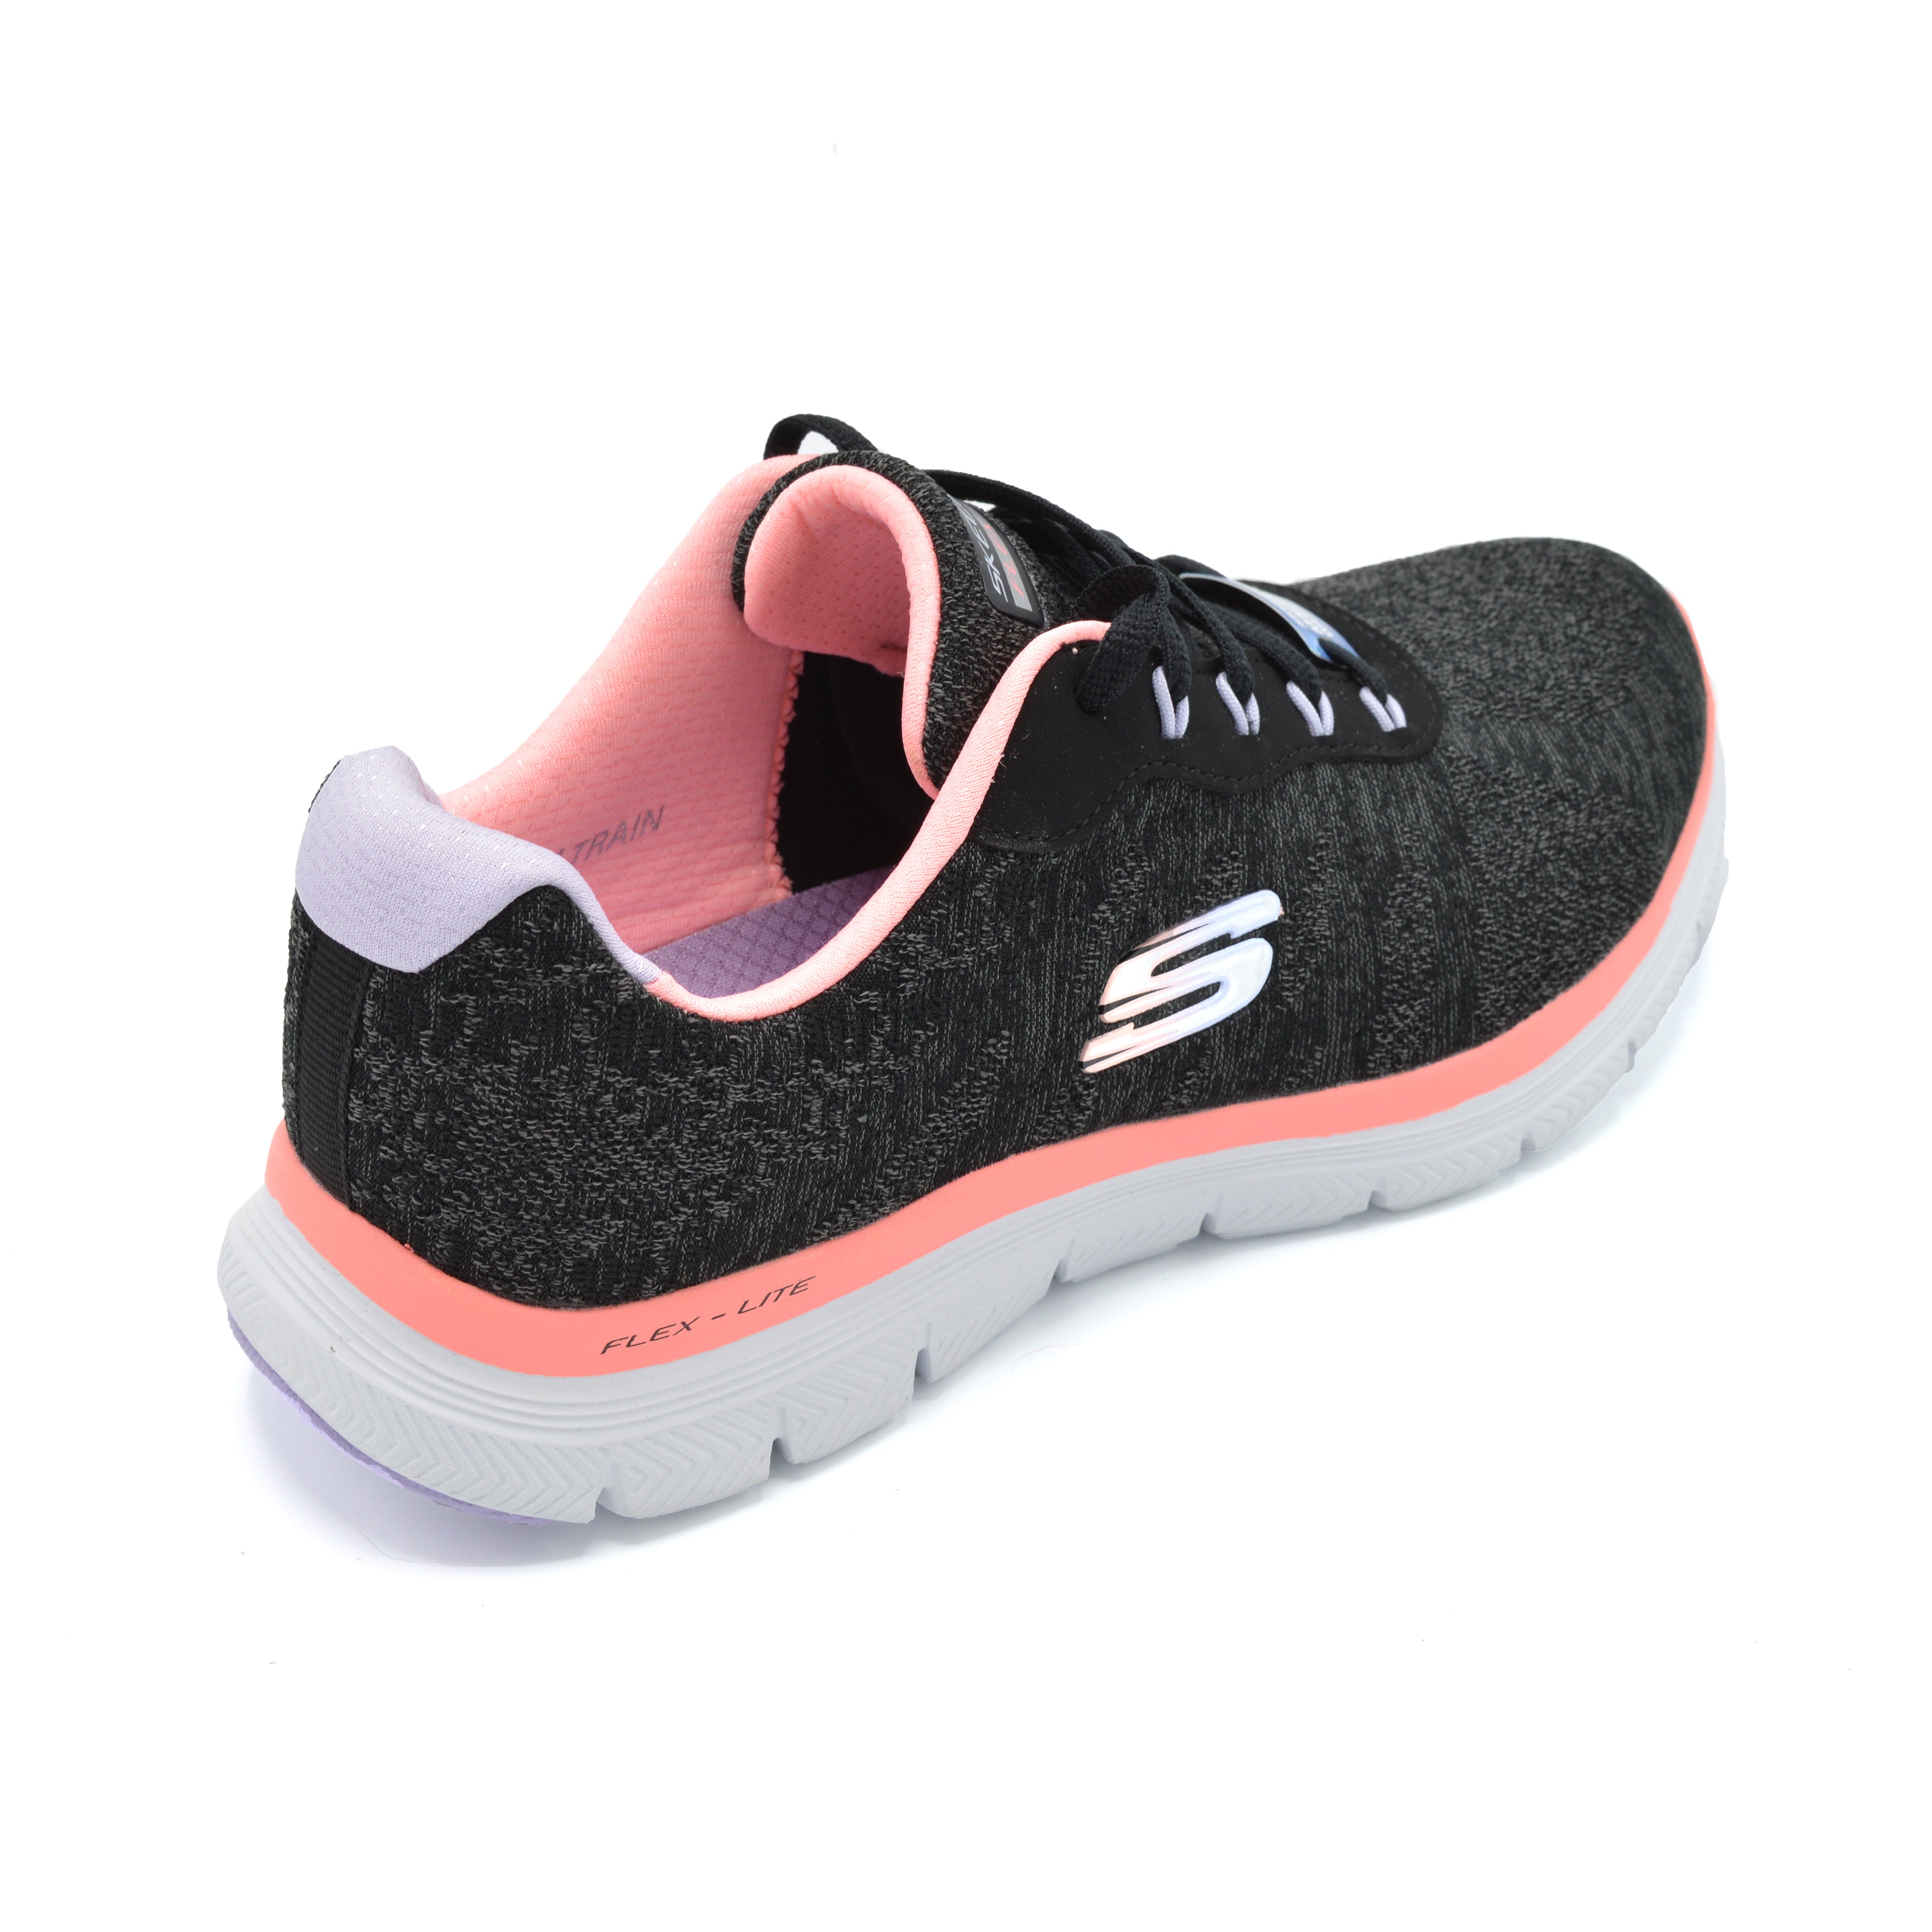 Skechers Wide Fitting Trainers For Bunions 